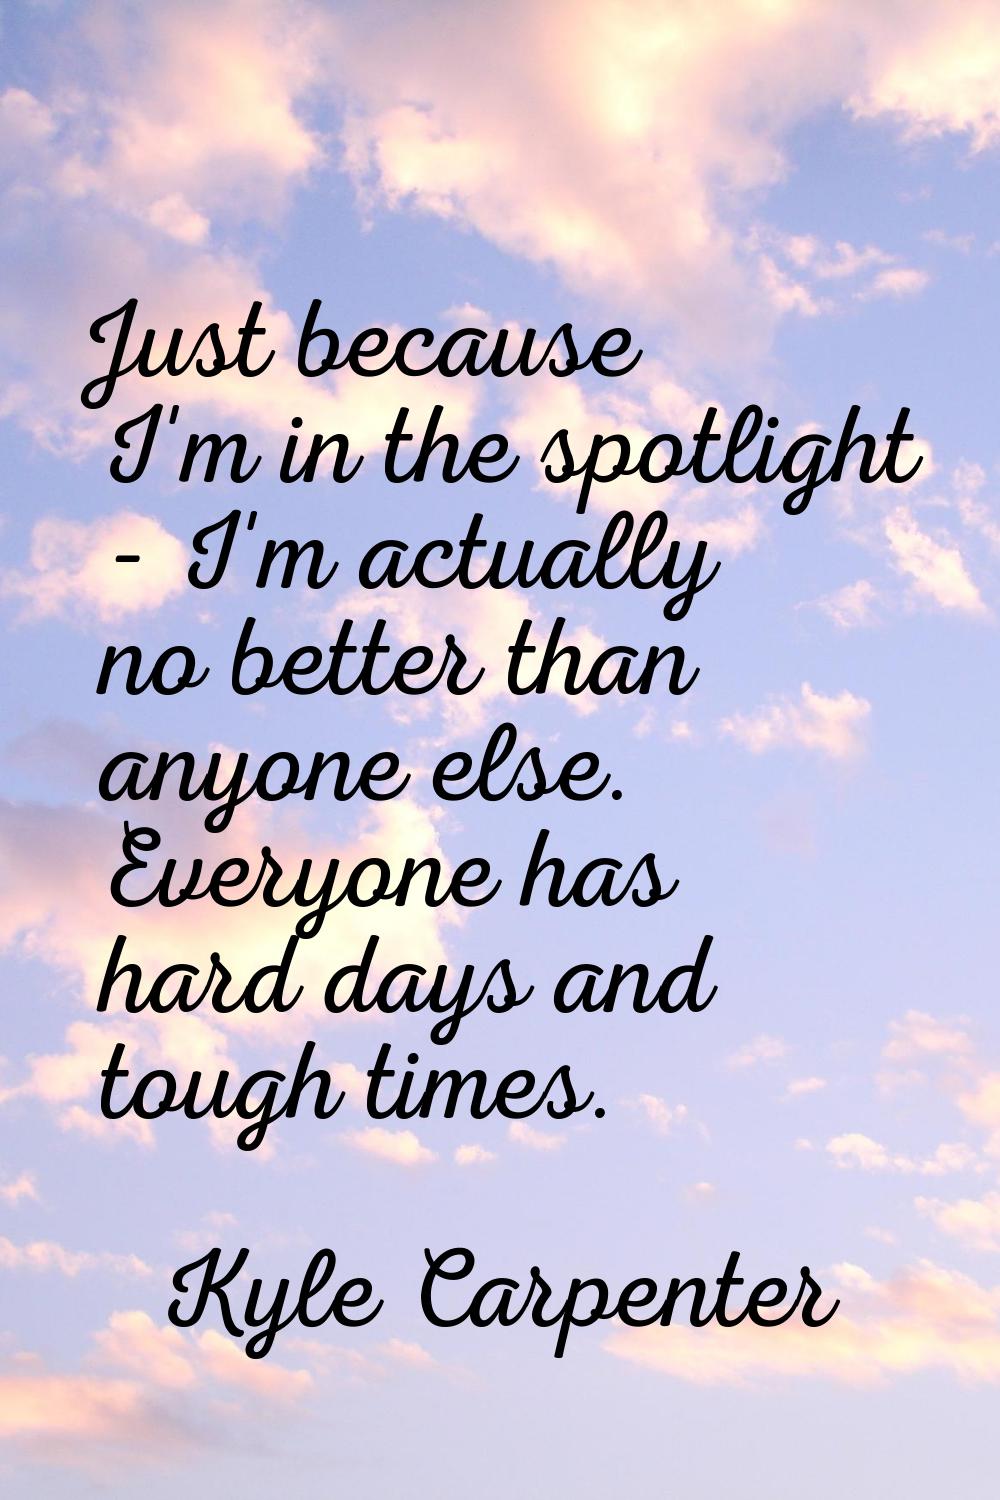 Just because I'm in the spotlight - I'm actually no better than anyone else. Everyone has hard days